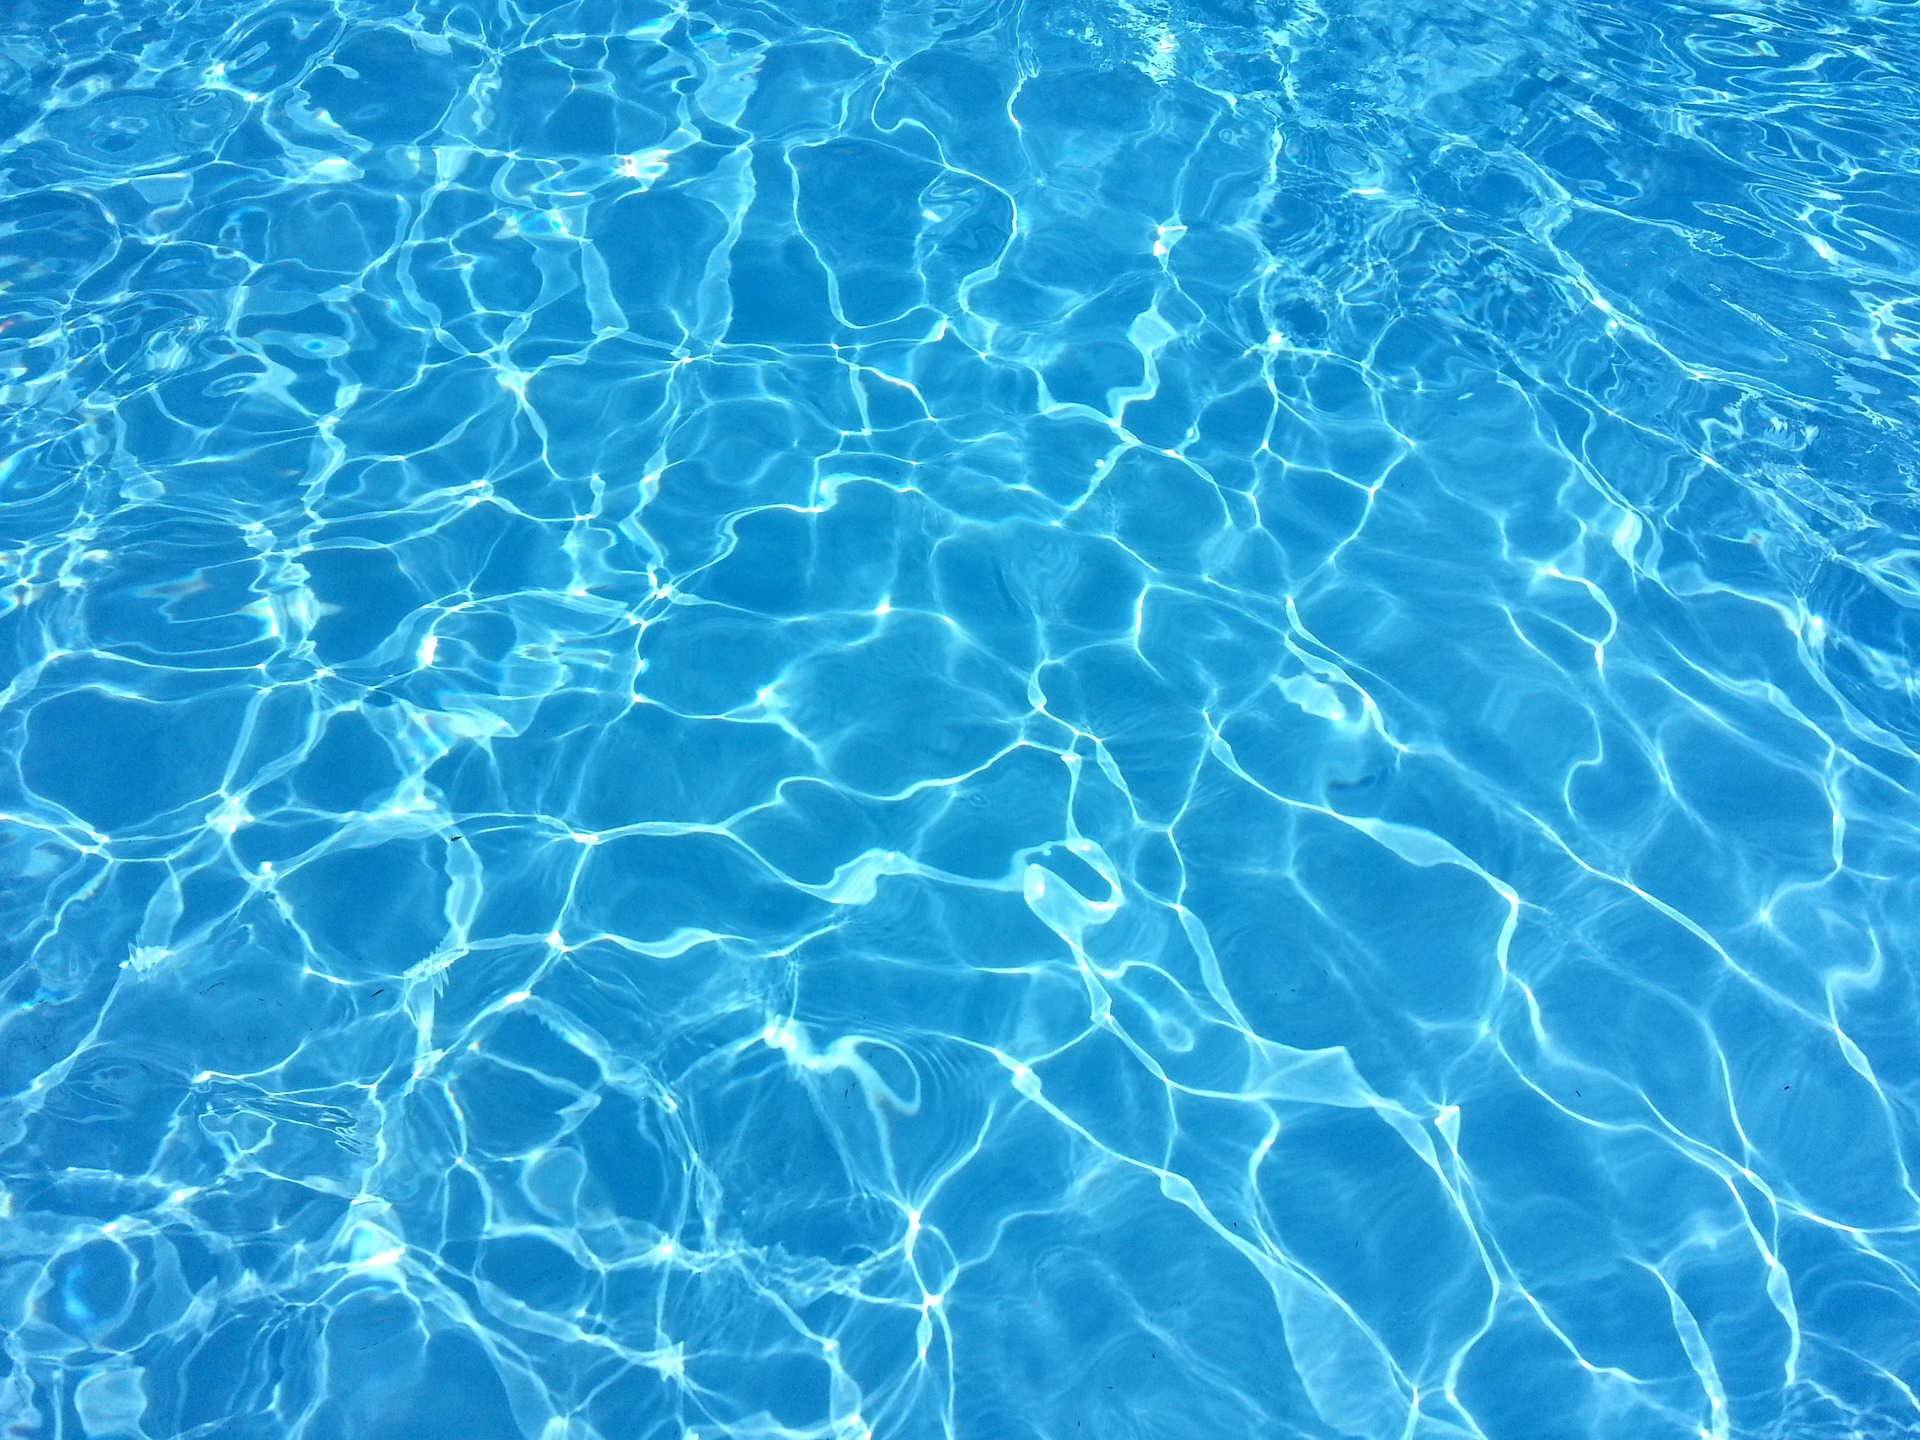 Image of the blue water in a pool